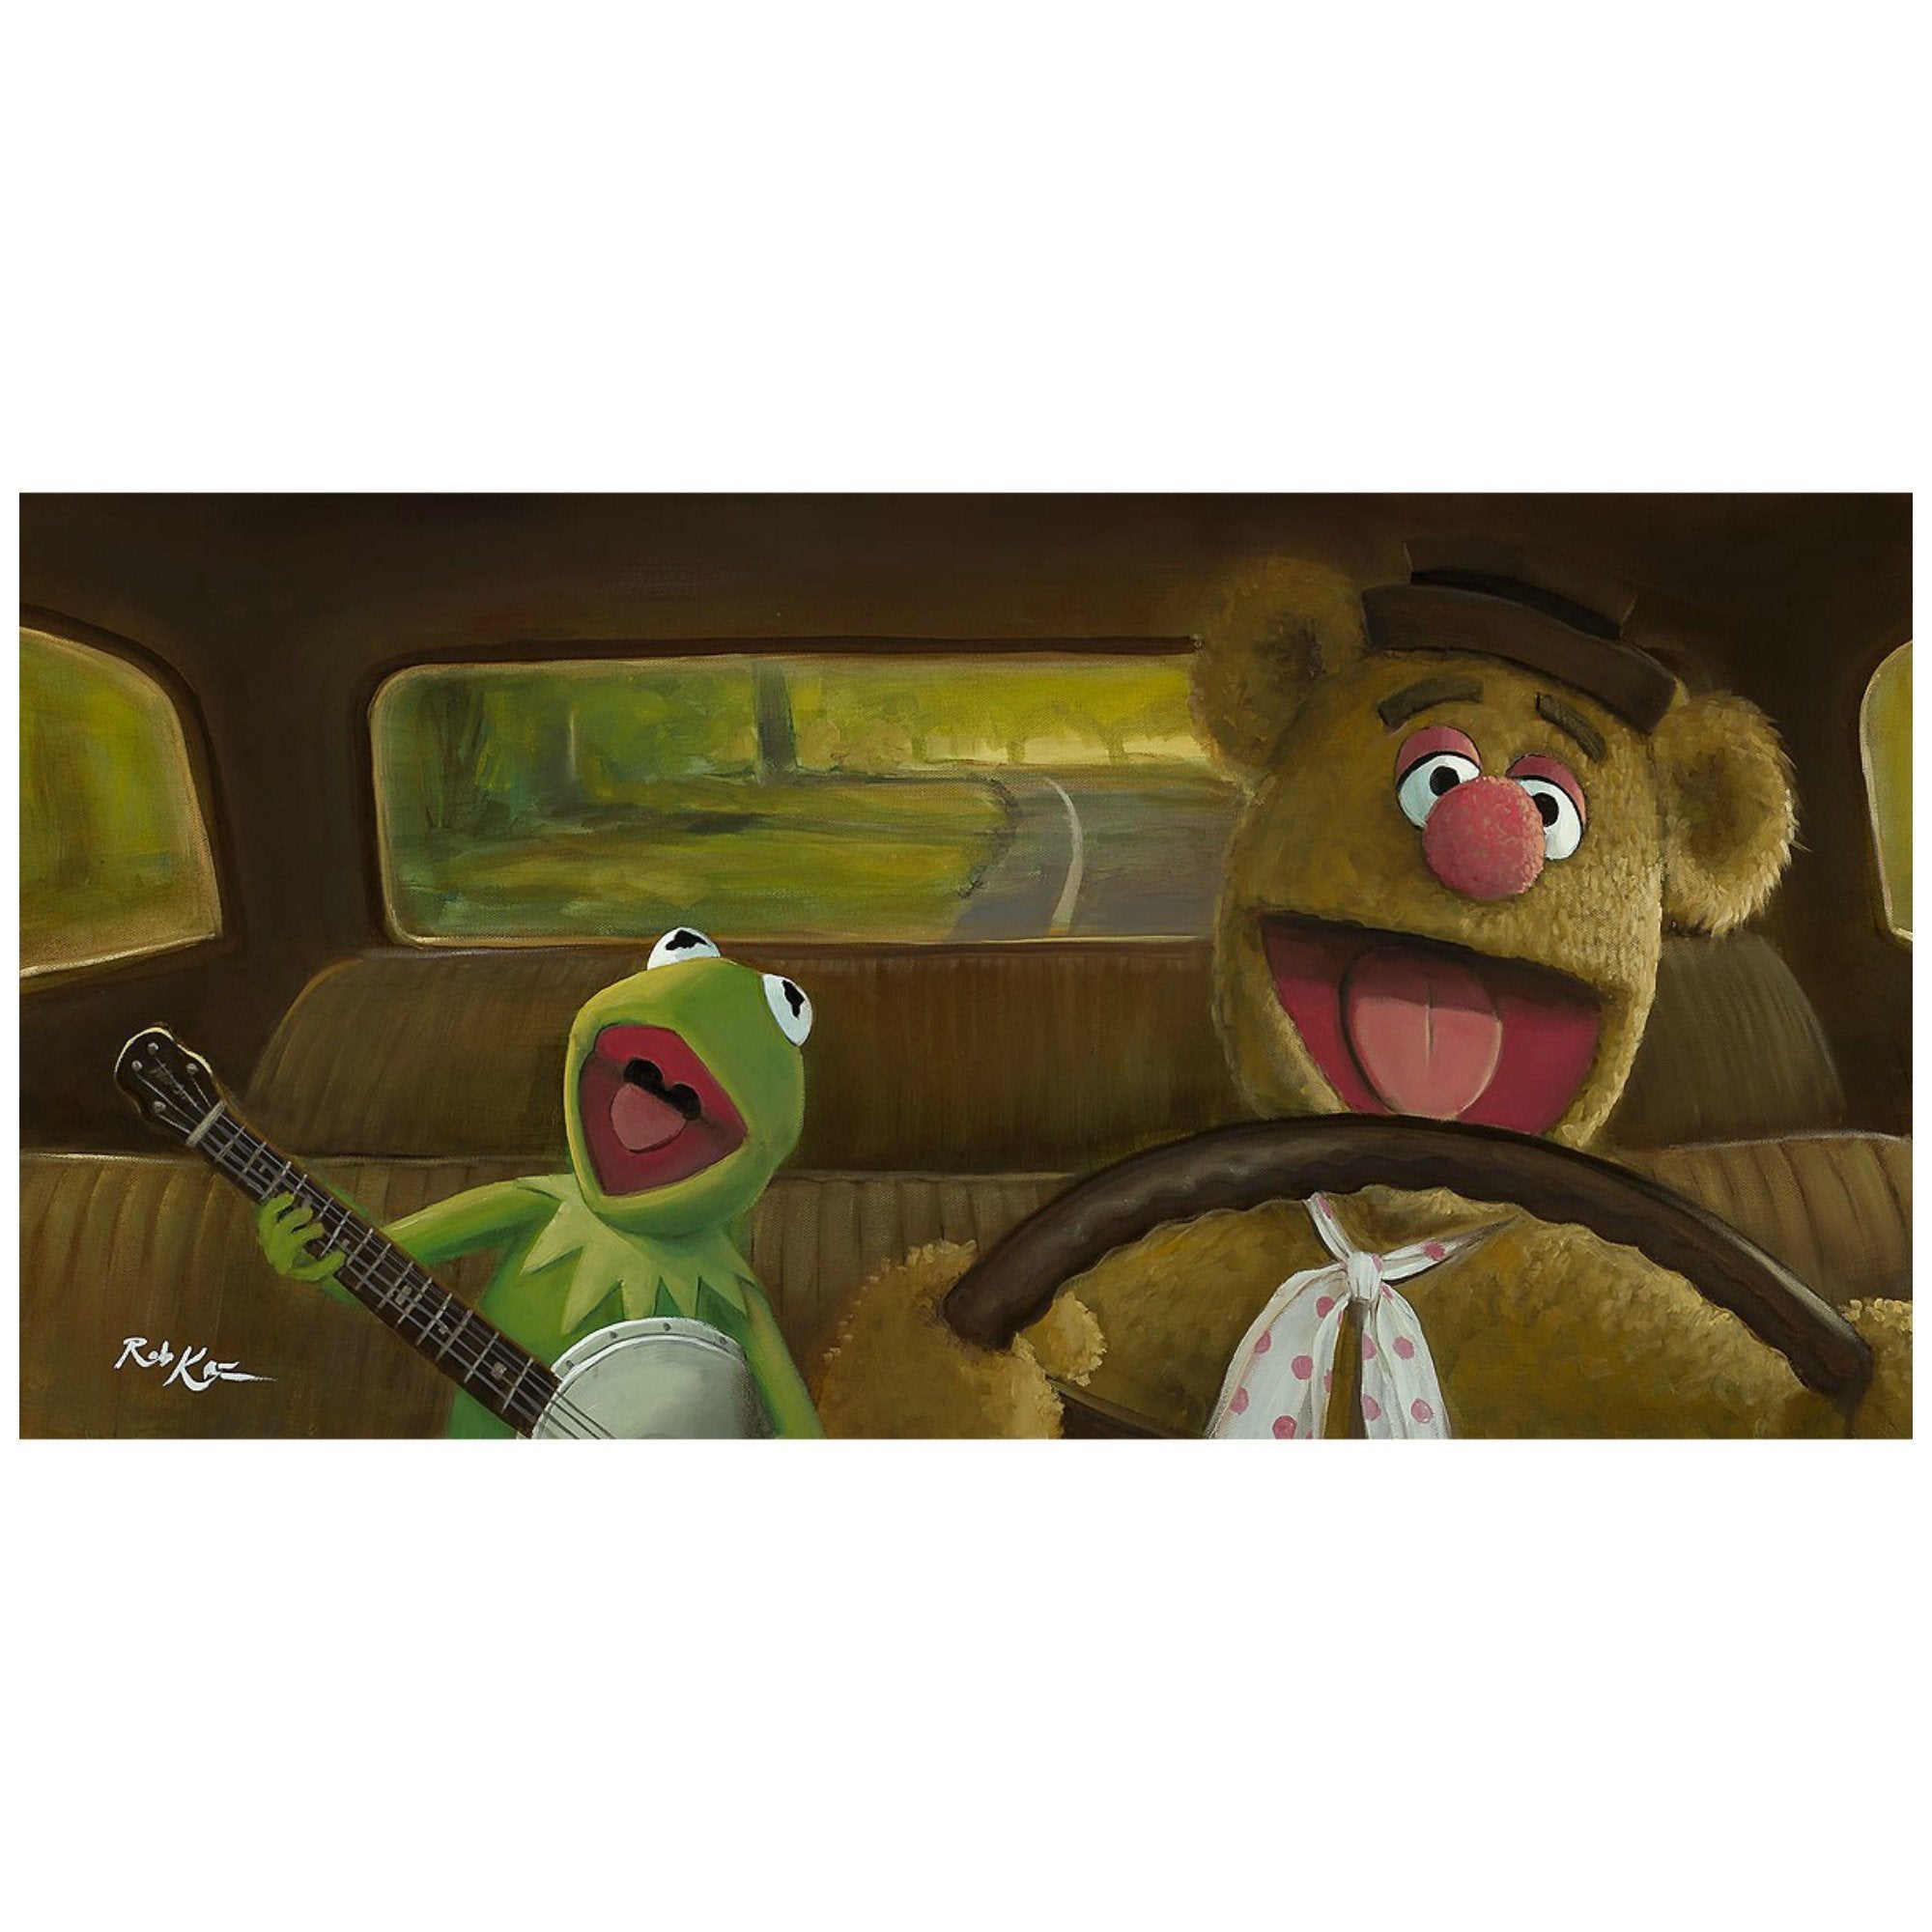 Movin Right Along by Rob Kaz.  Fozzie the bear behind the driver's wheel, singing along with Kermit the Frog as he plays his banjo. 